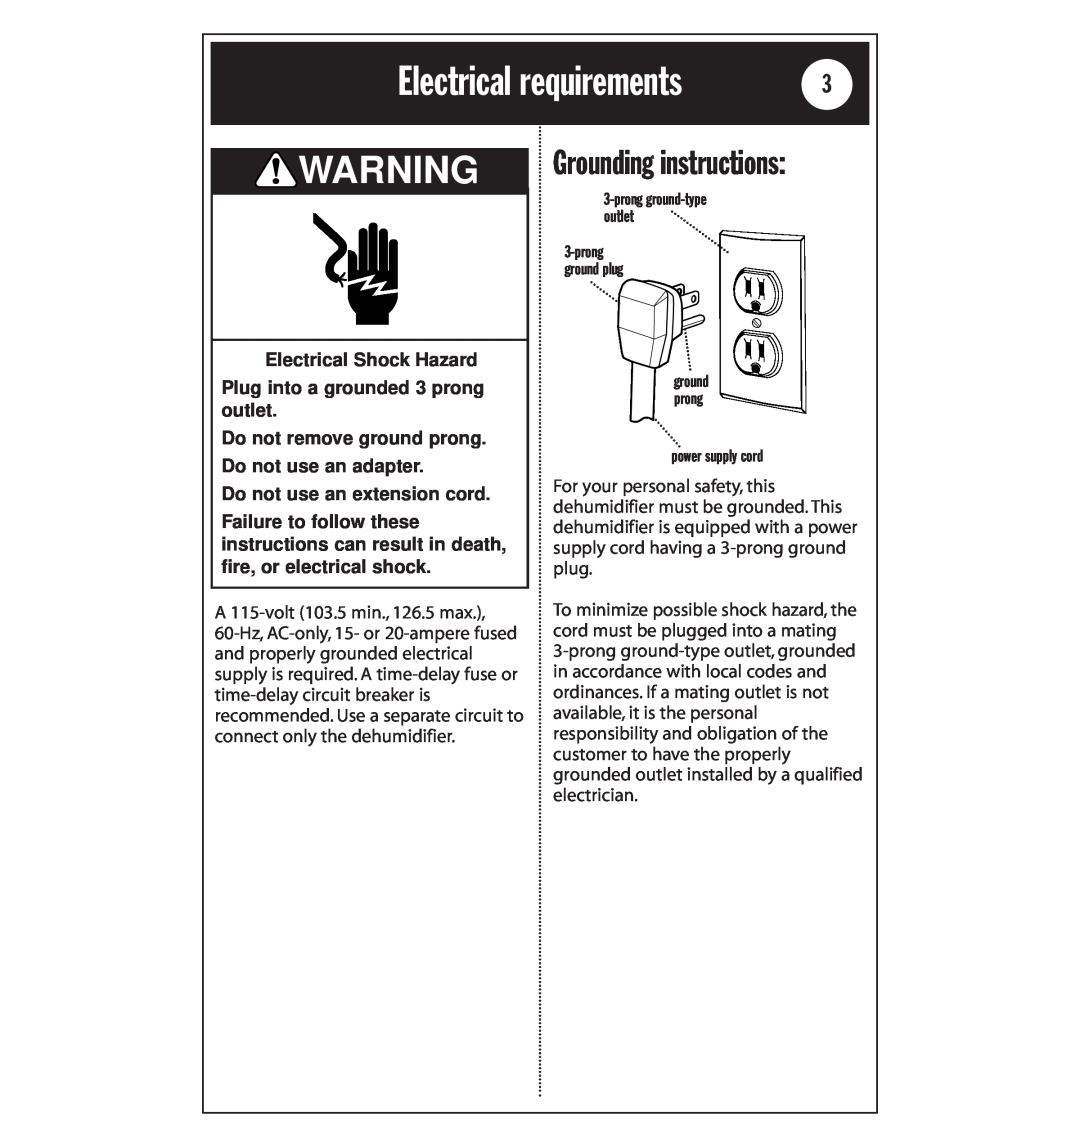 Whirlpool AD25BBK0 Electrical requirements, Grounding instructions, Electrical Shock Hazard, Do not use an extension cord 